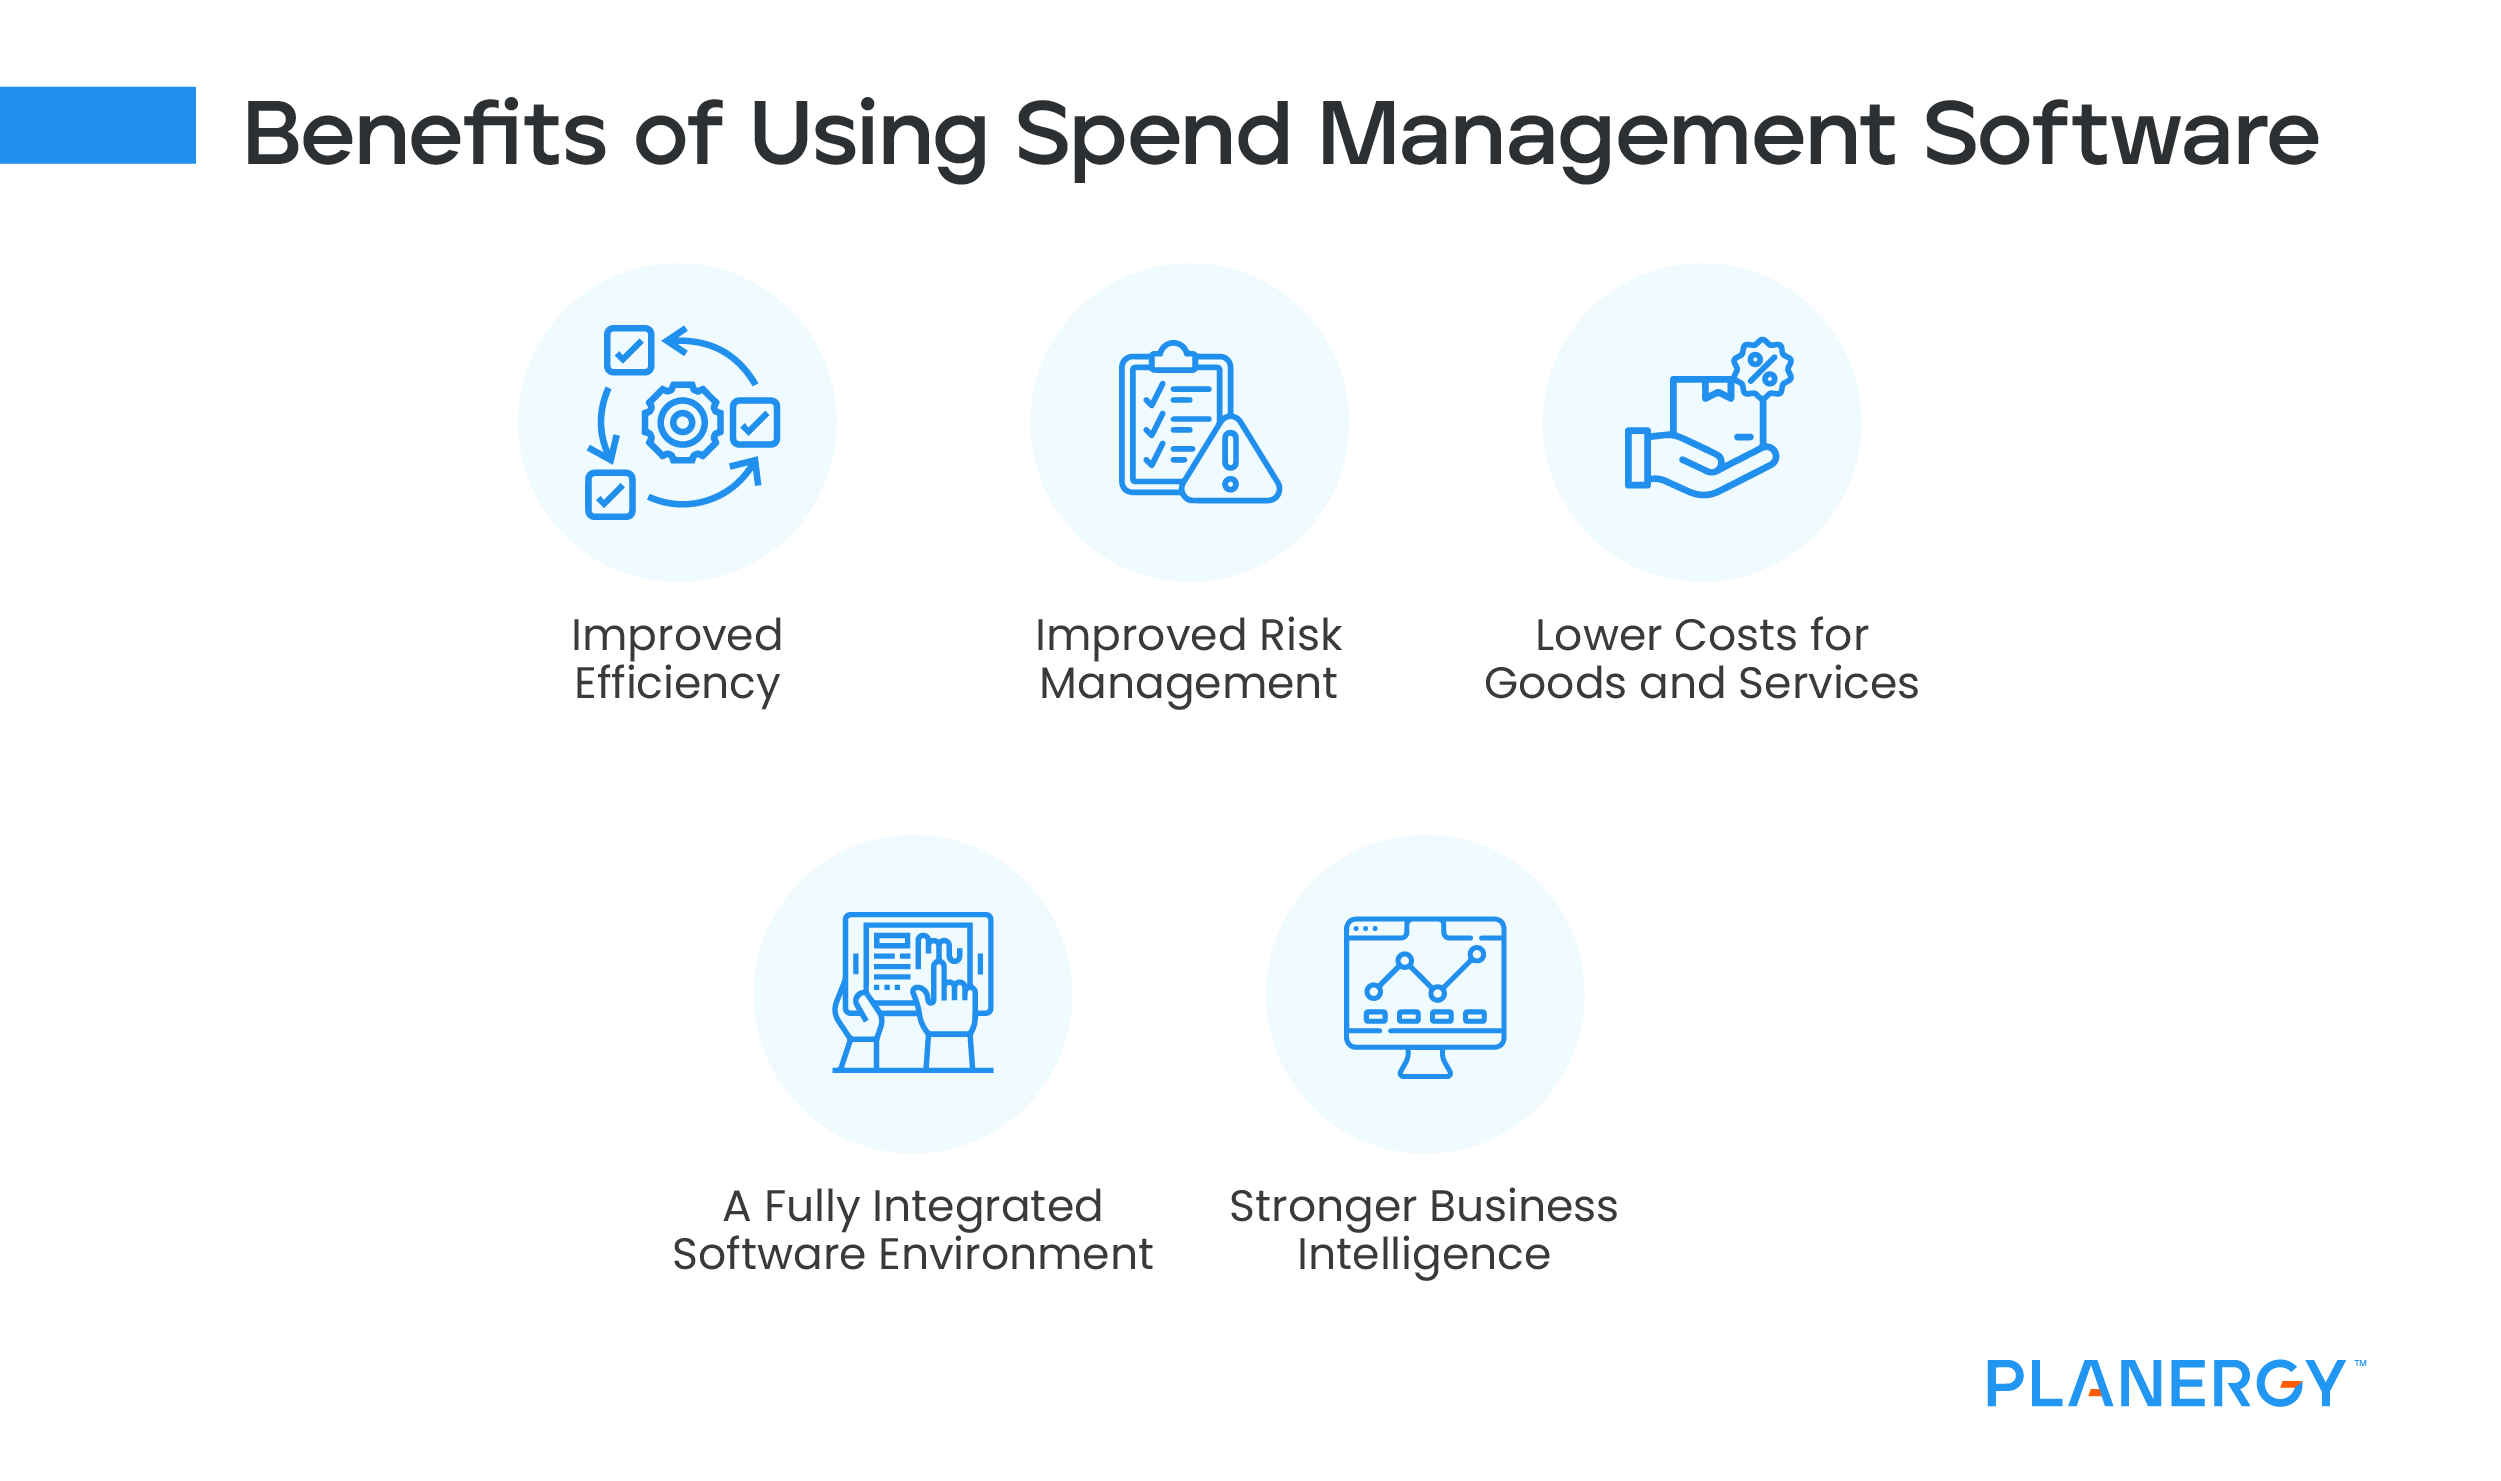 Benefits of Using Spend Management Software